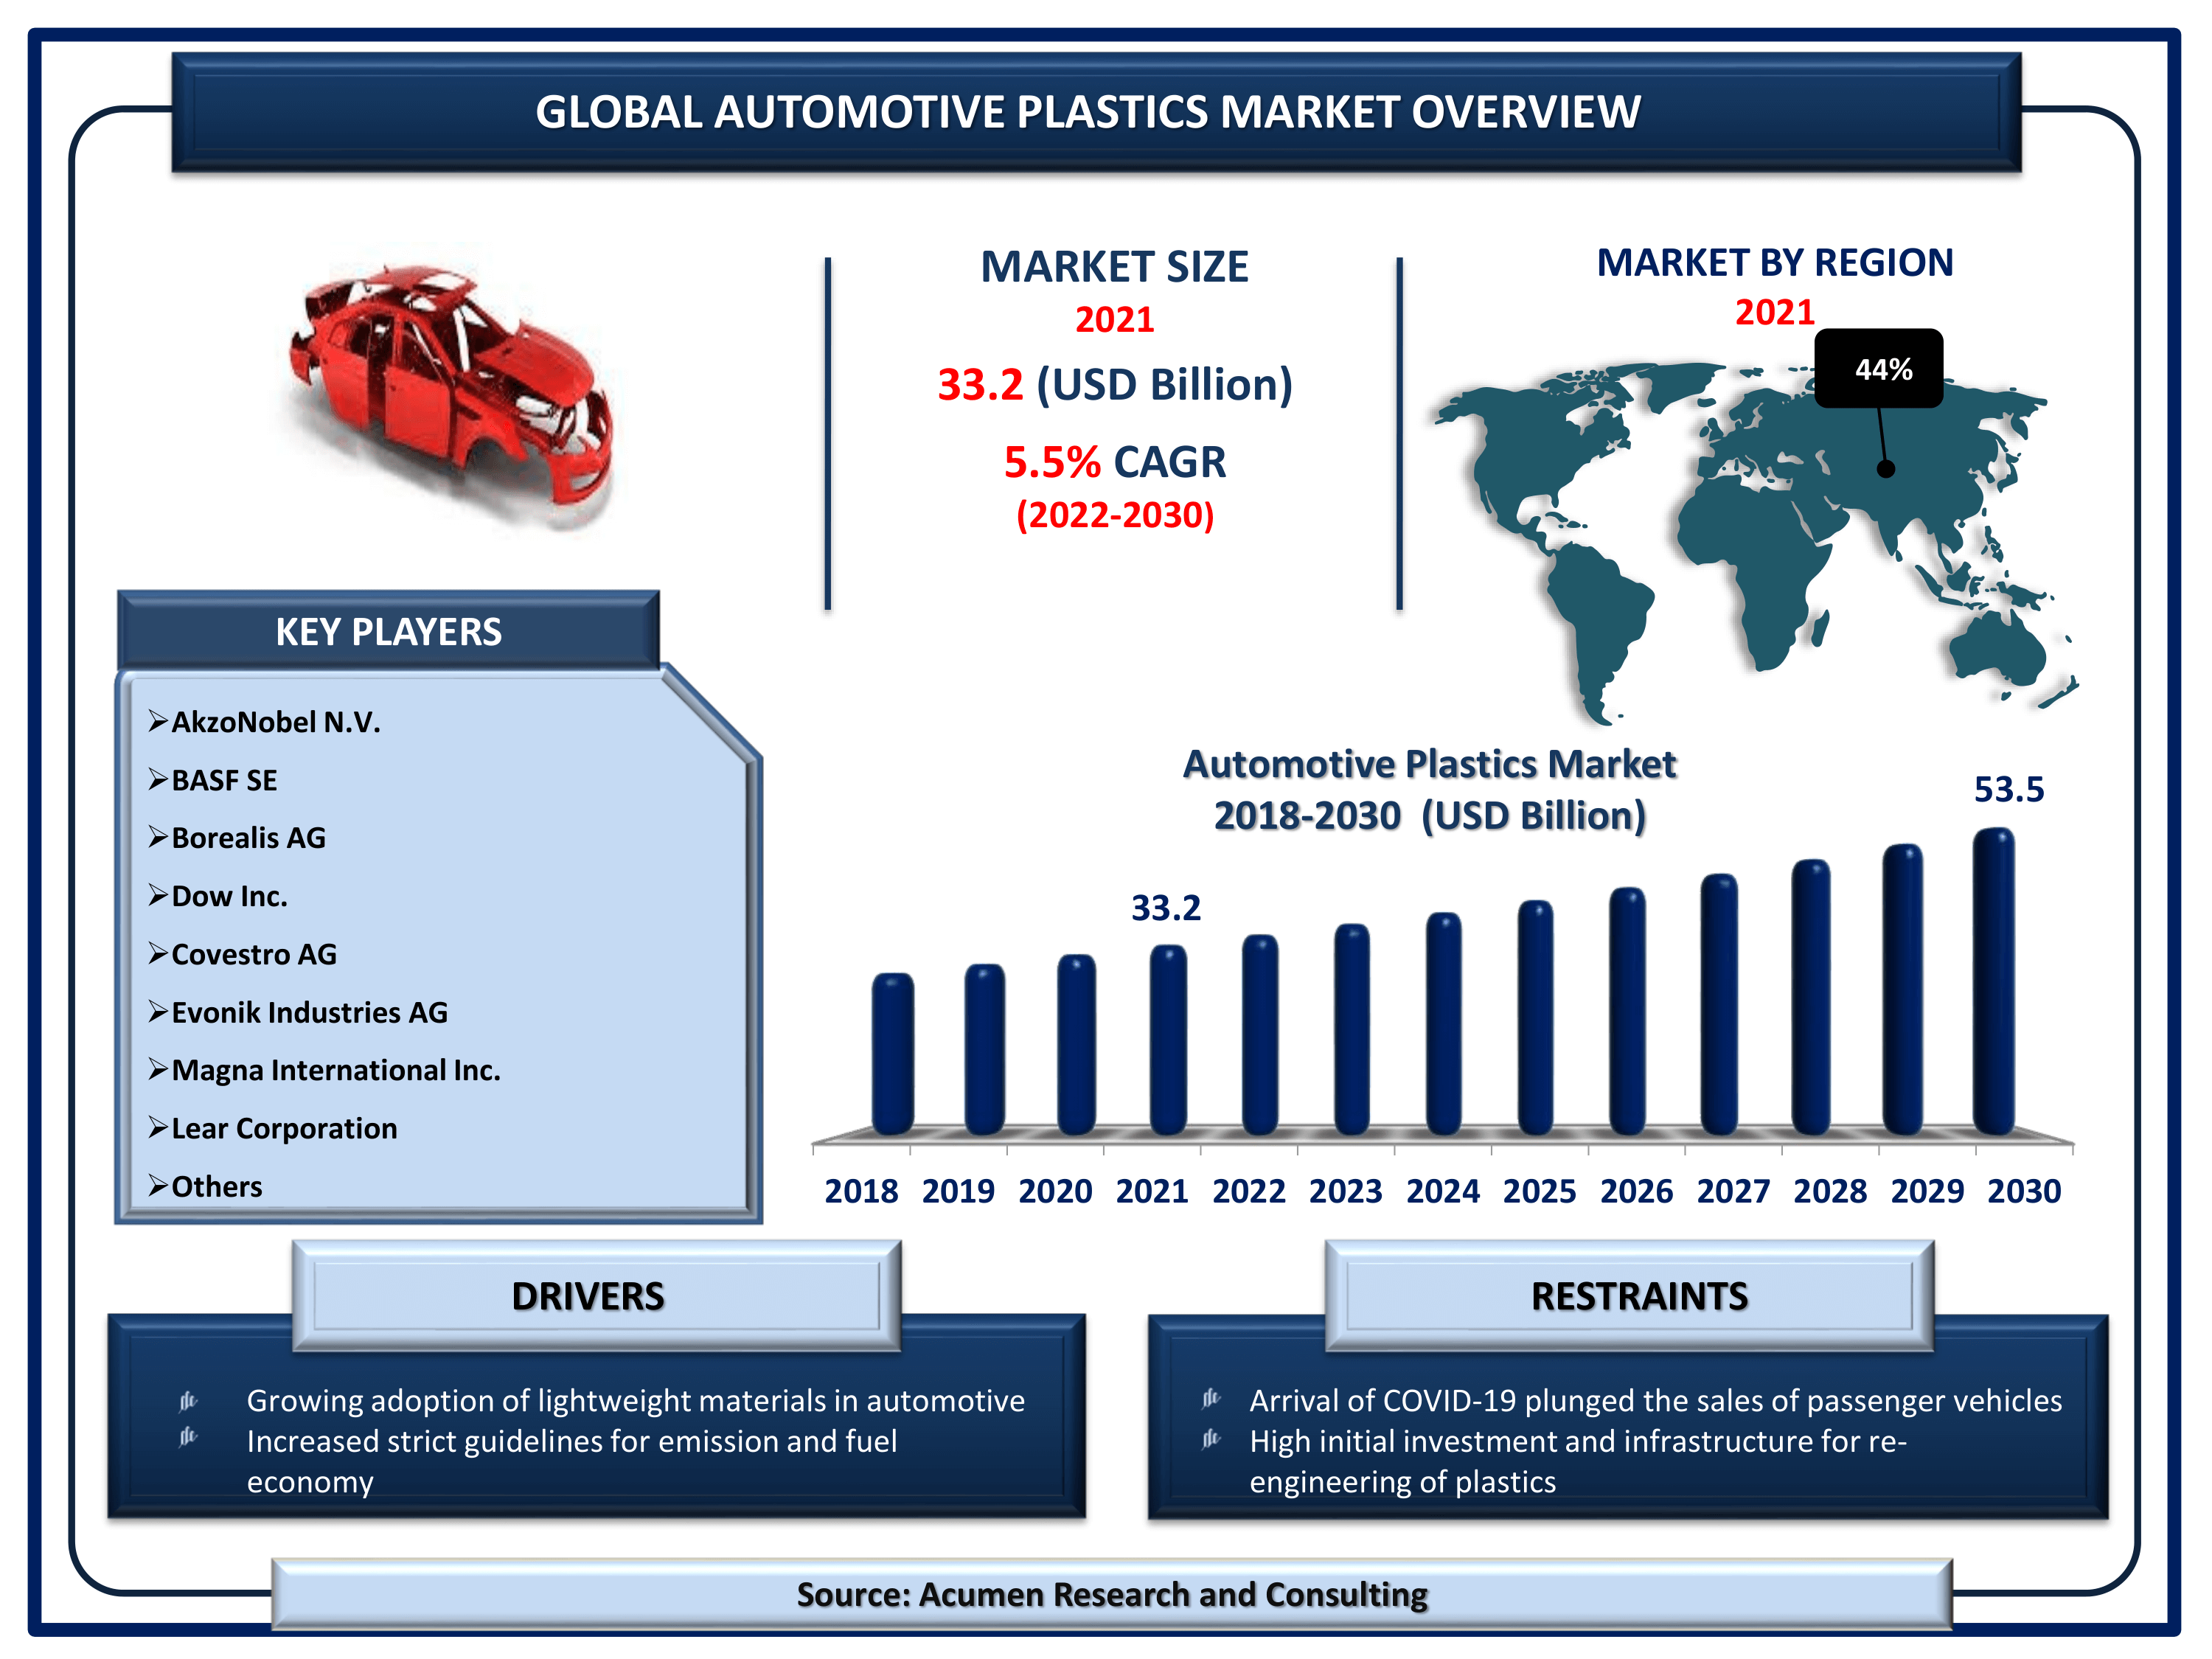 Global automotive plastics market revenue is estimated to reach USD 53.5 Billion by 2030 with a CAGR of 5.5% from 2022 to 2030